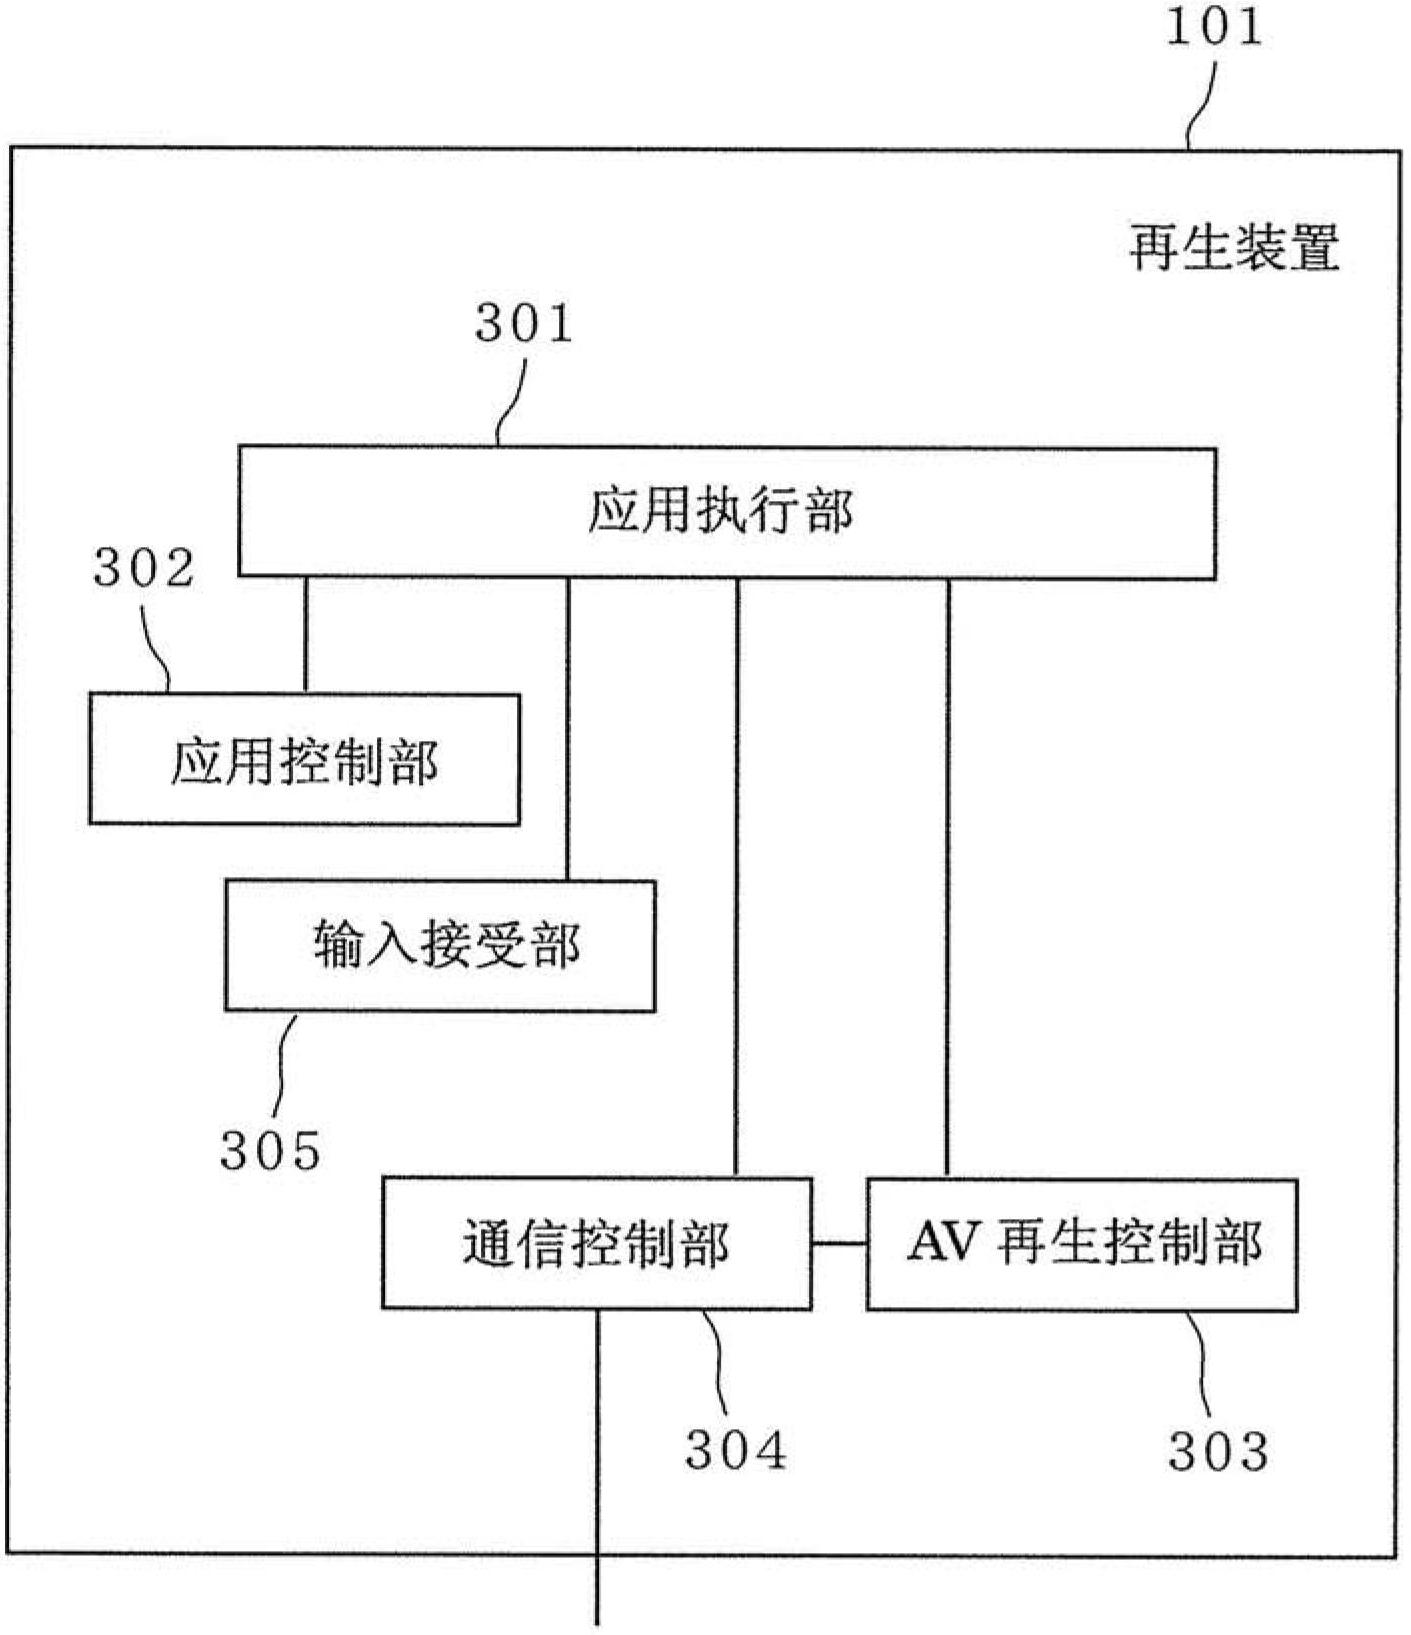 Format conversion server, reproduction device and information reproduction system